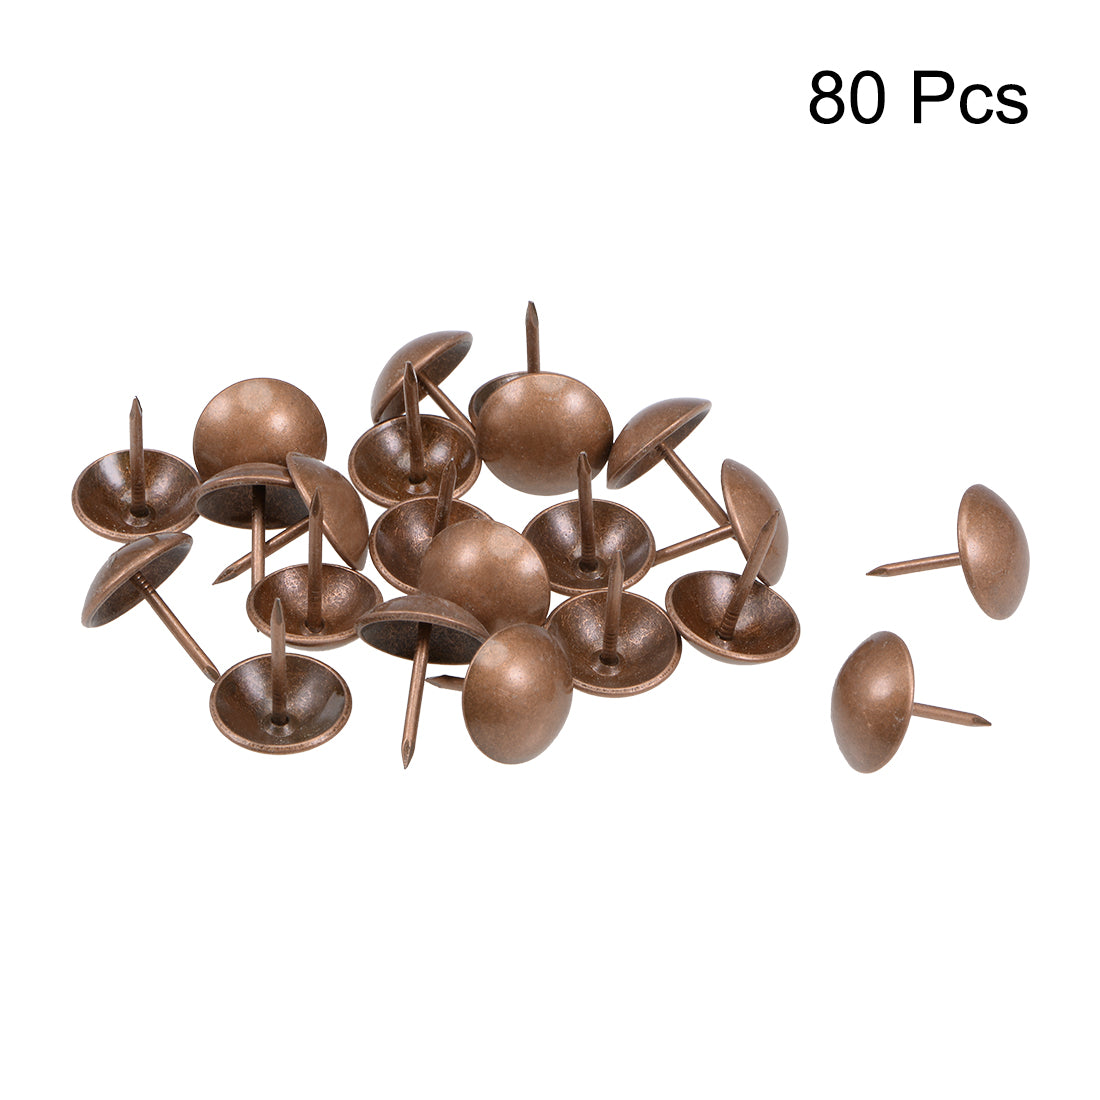 uxcell Uxcell Upholstery Nails Tacks 19mm Head Dia Antique Round Thumb Push Pins Copper Tone 80 Pcs